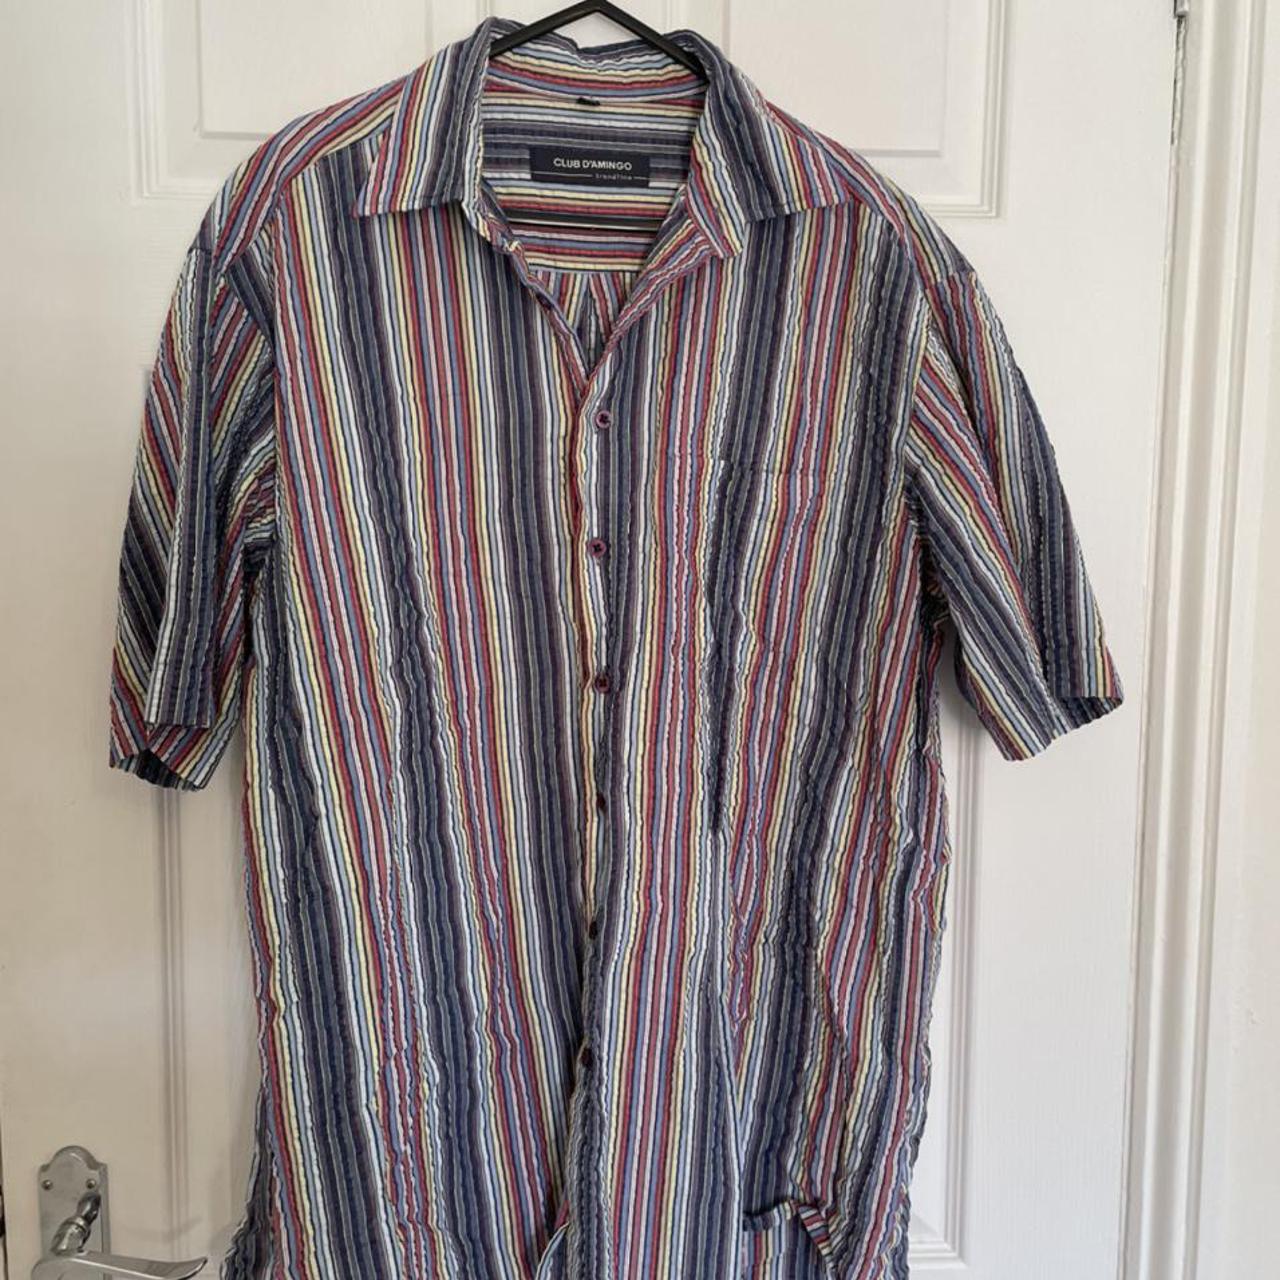 Vintage button up shirt. Funky material so great to... - Depop